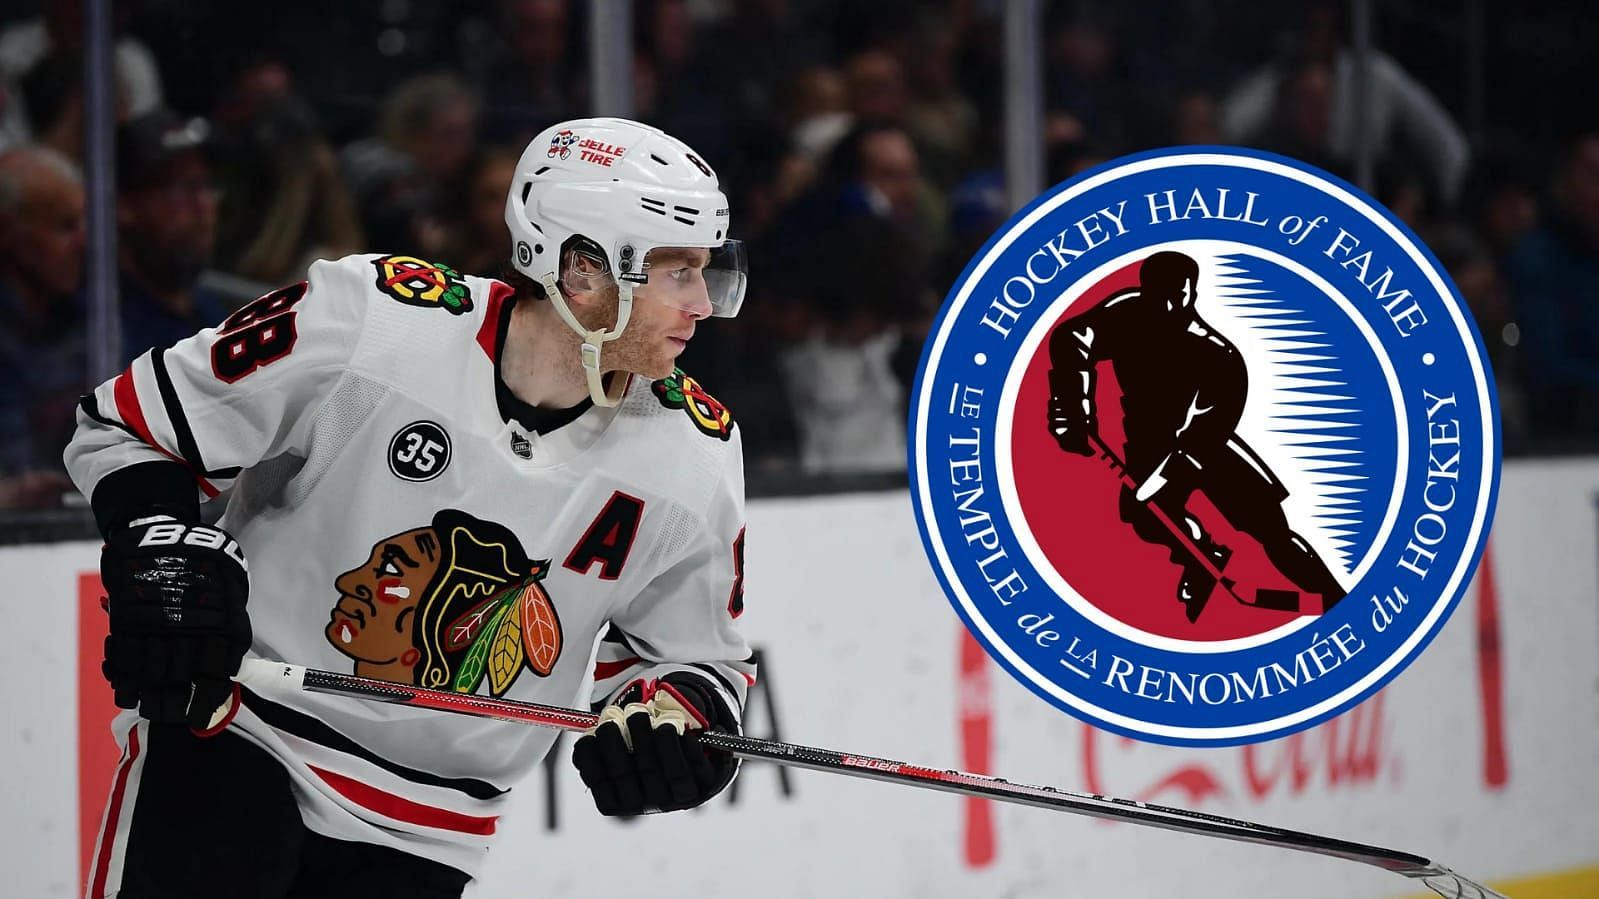 Has Patrick Kane done enough to be in the Hall of Fame?